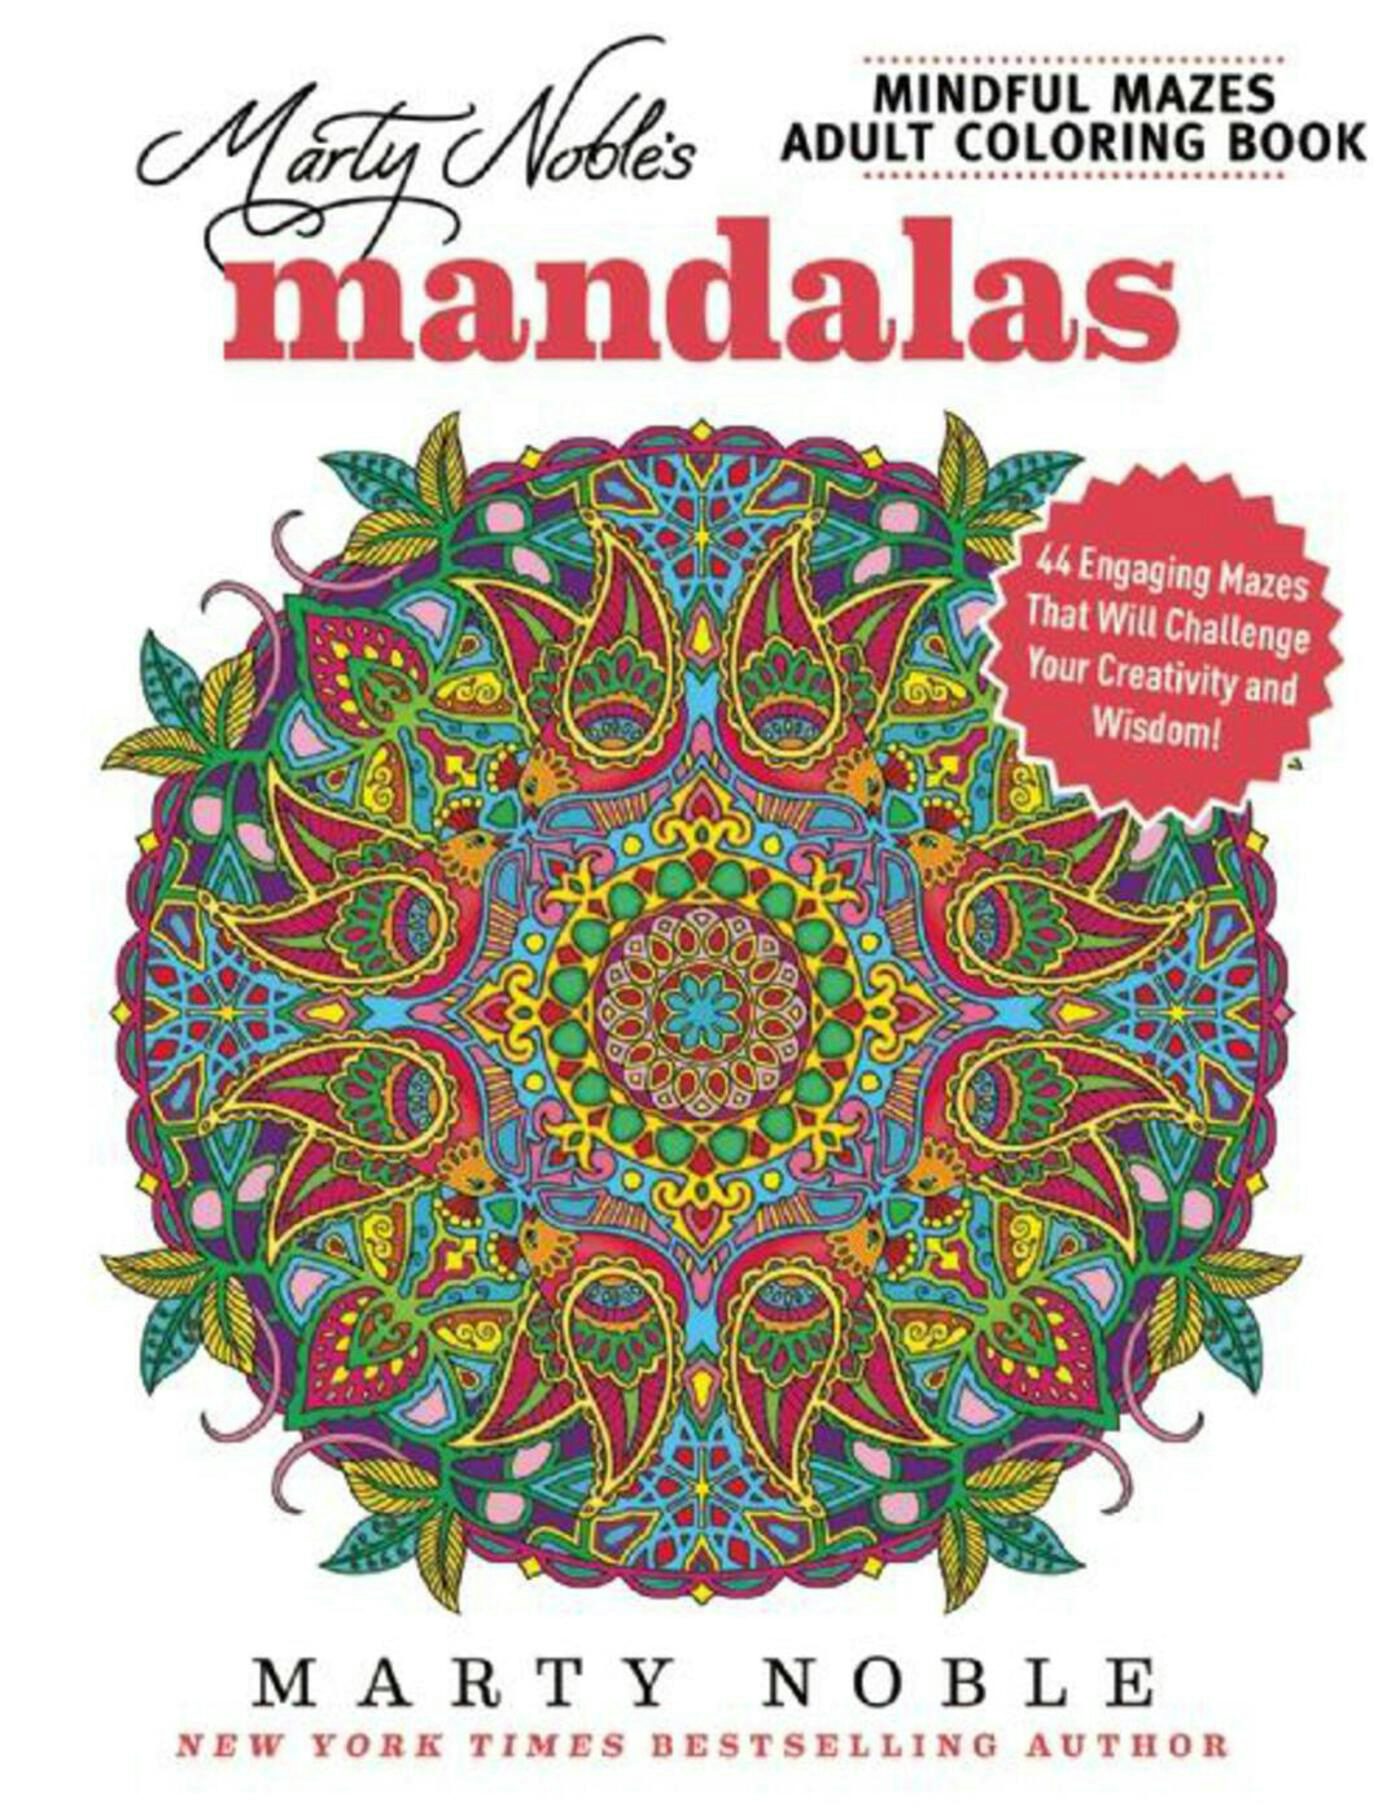 Marty Noble's Mindful Mazes Adult Coloring Book: Mandalas